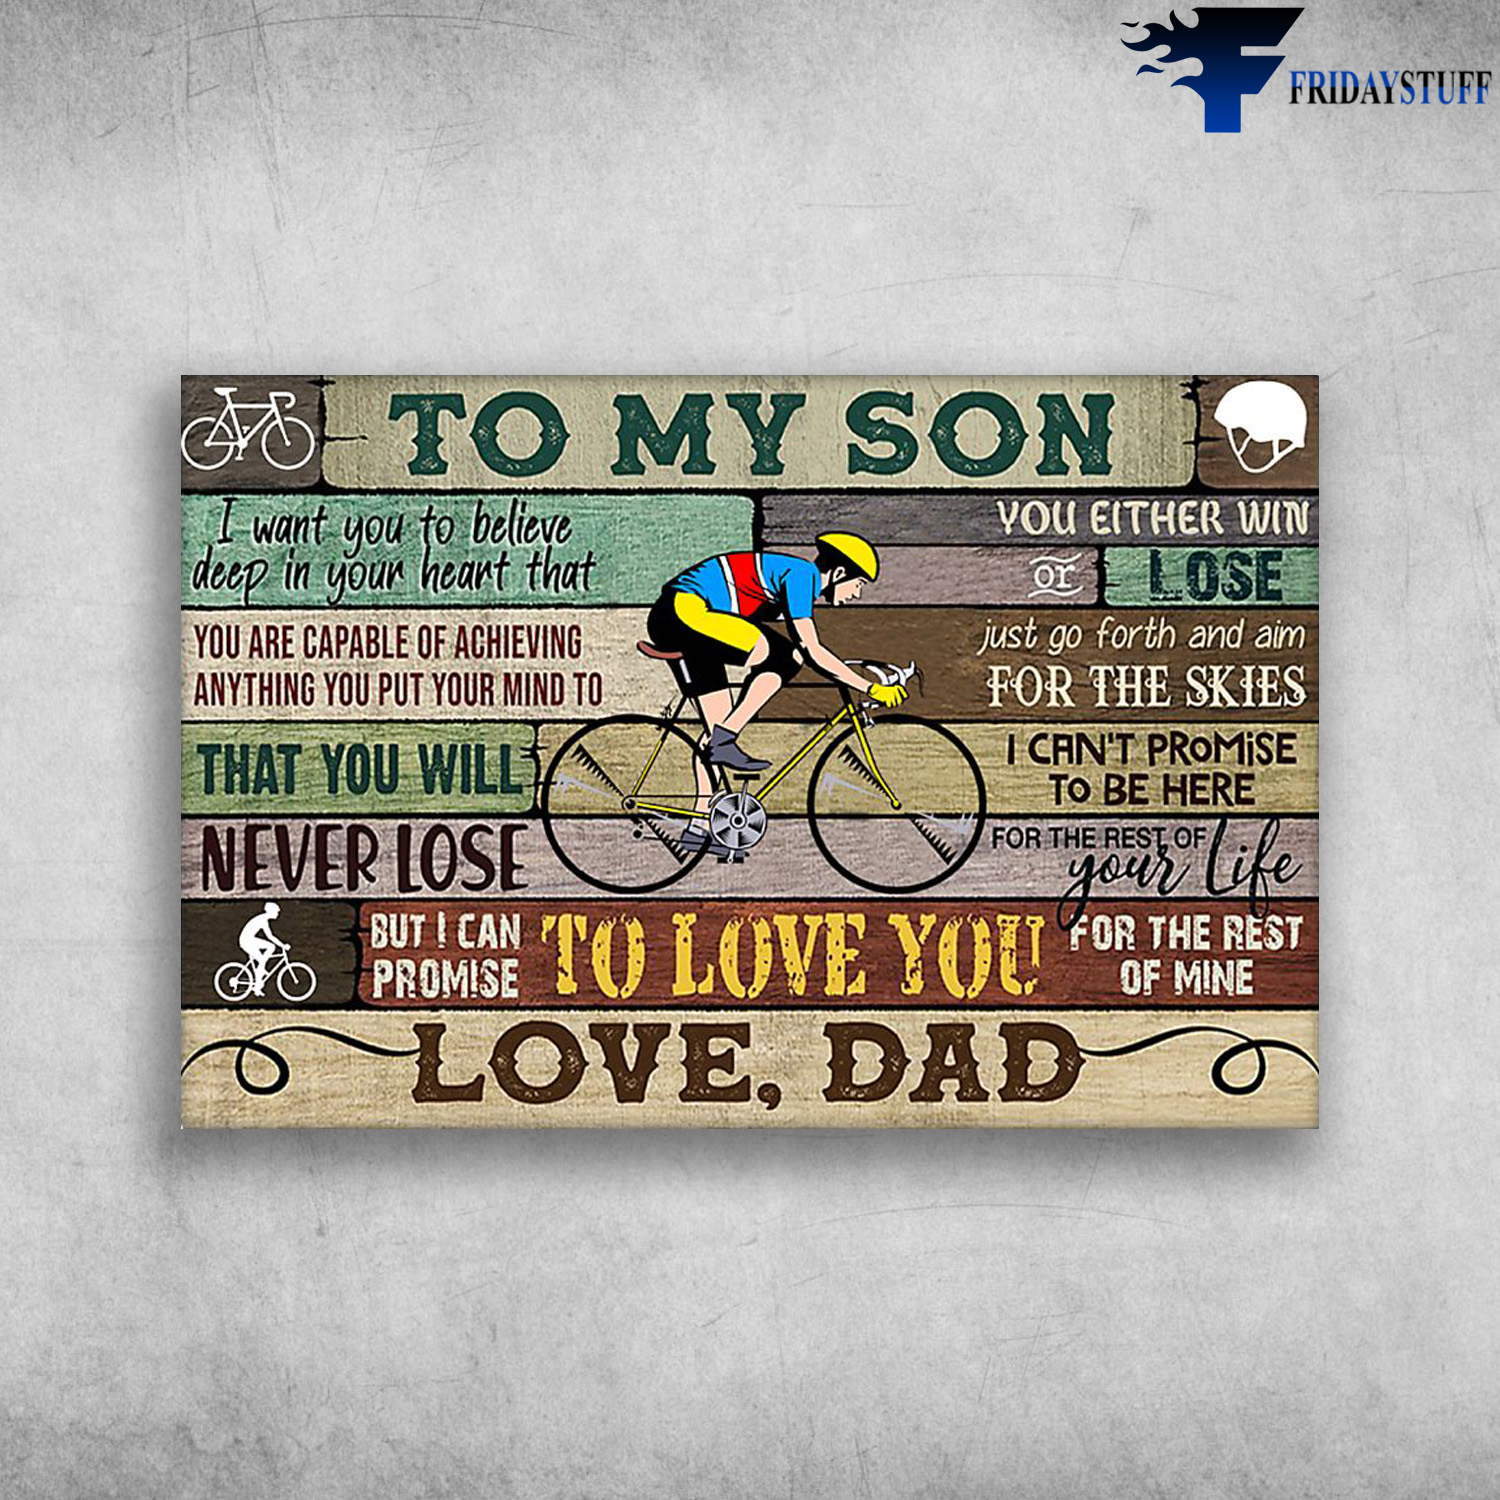 The Man Riding Bicycle - To My Son I Want You To Believe Deep In Your Heart